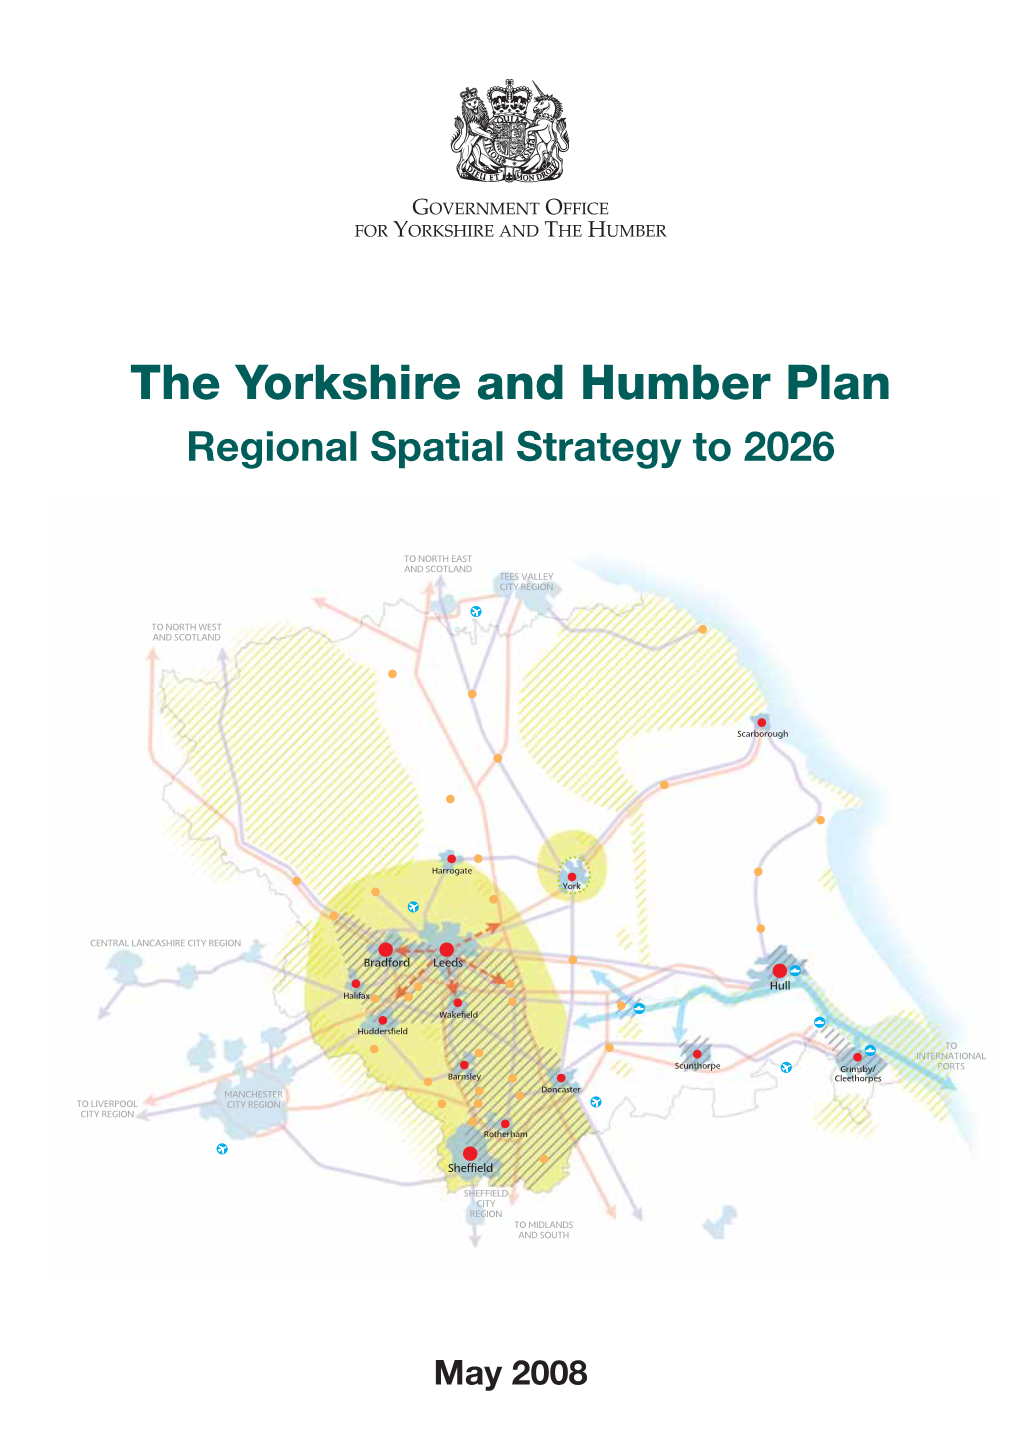 The Yorkshire and Humber Plan Regional Spatial Strategy to 2026